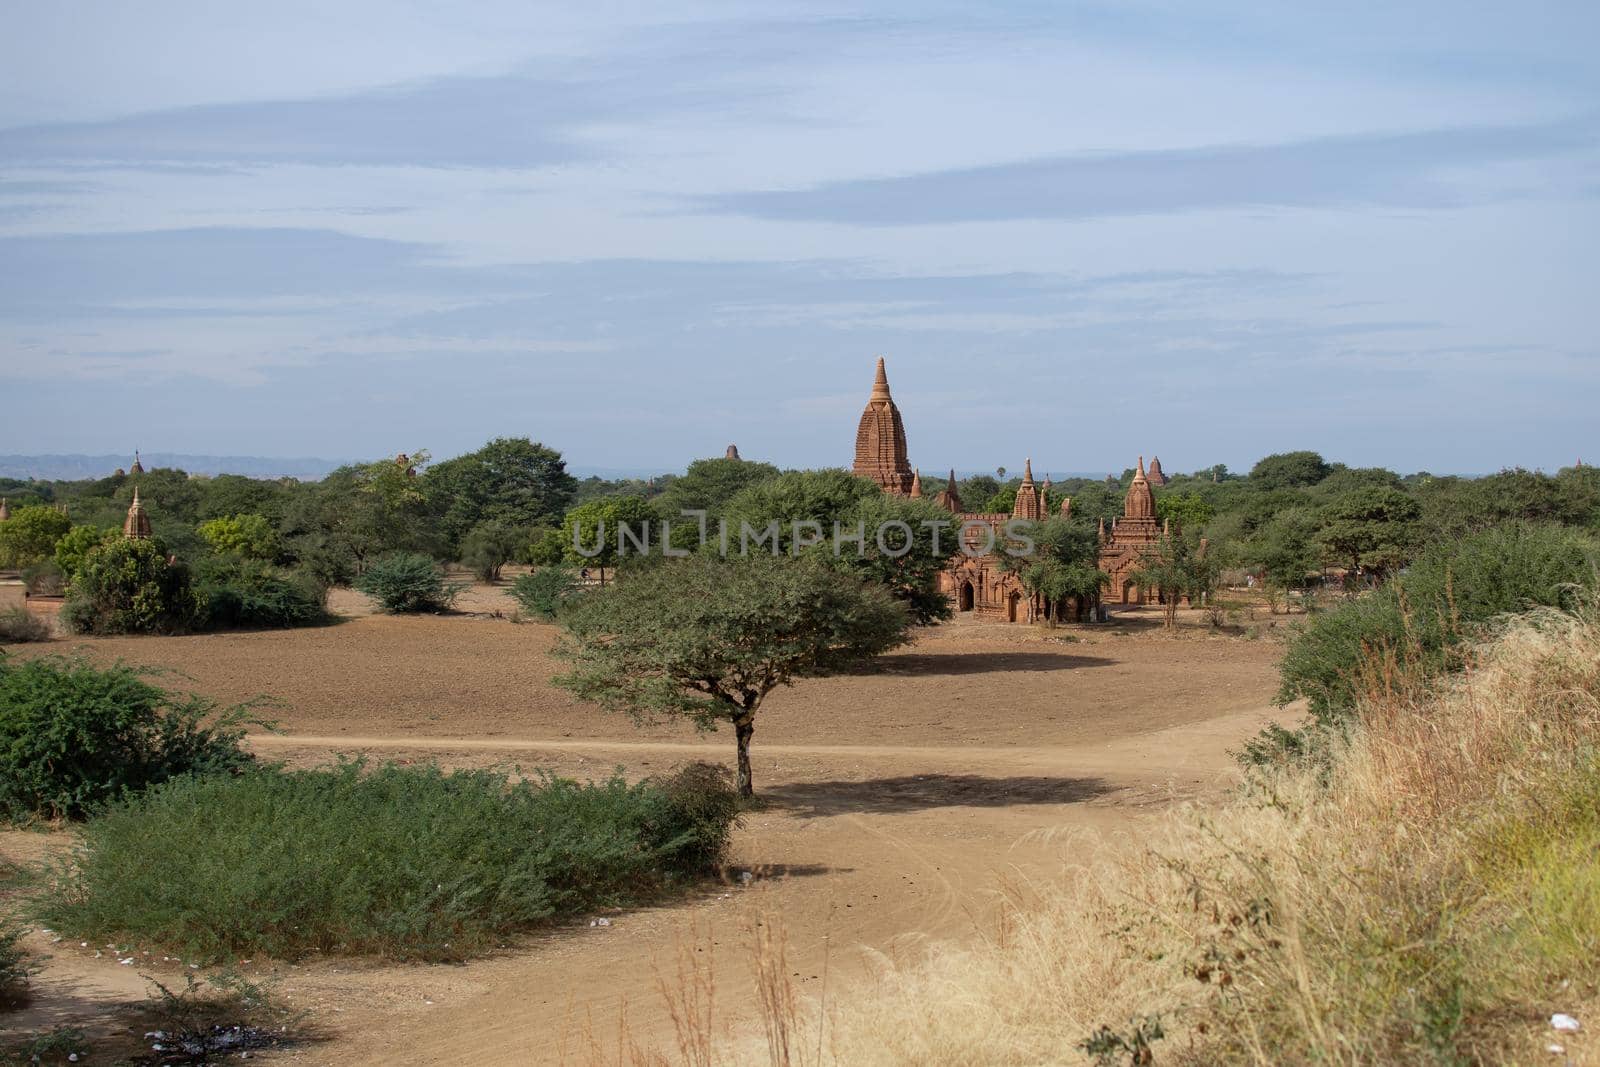 BAGAN, NYAUNG-U, MYANMAR - 3 JANUARY 2020: Several old and historical temple pagodas and green vegetation in the distance from an open dry grass and hay field by a dirt road